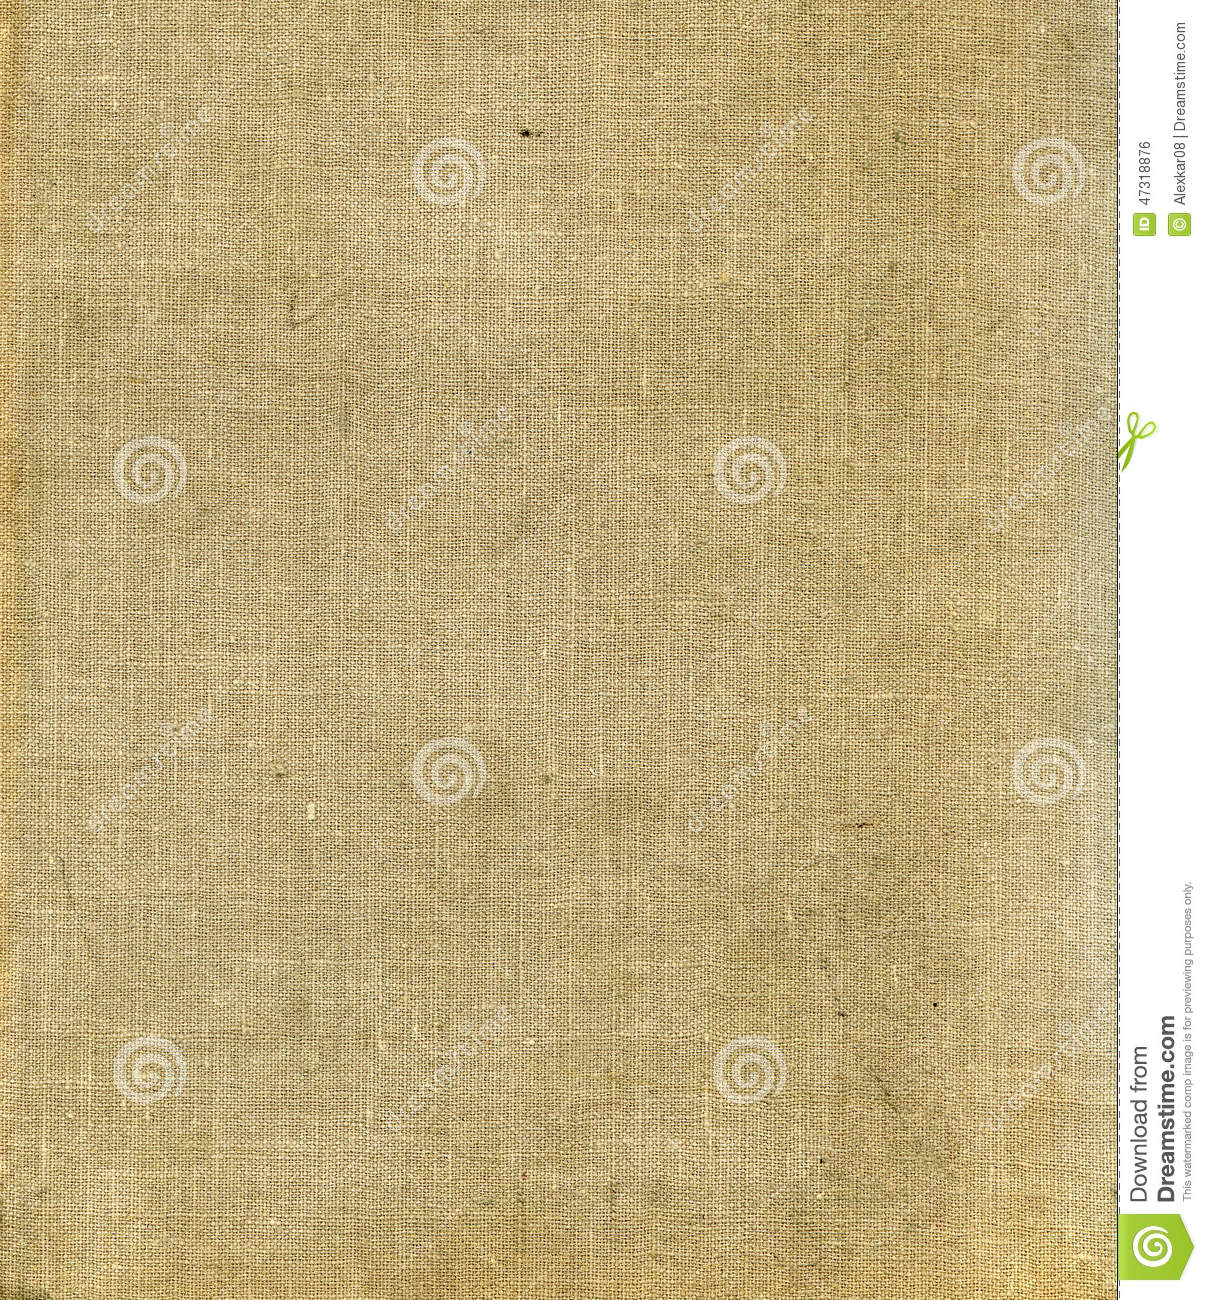 Dirty Stained Linen Striped Textured Sacking Burlap Background 